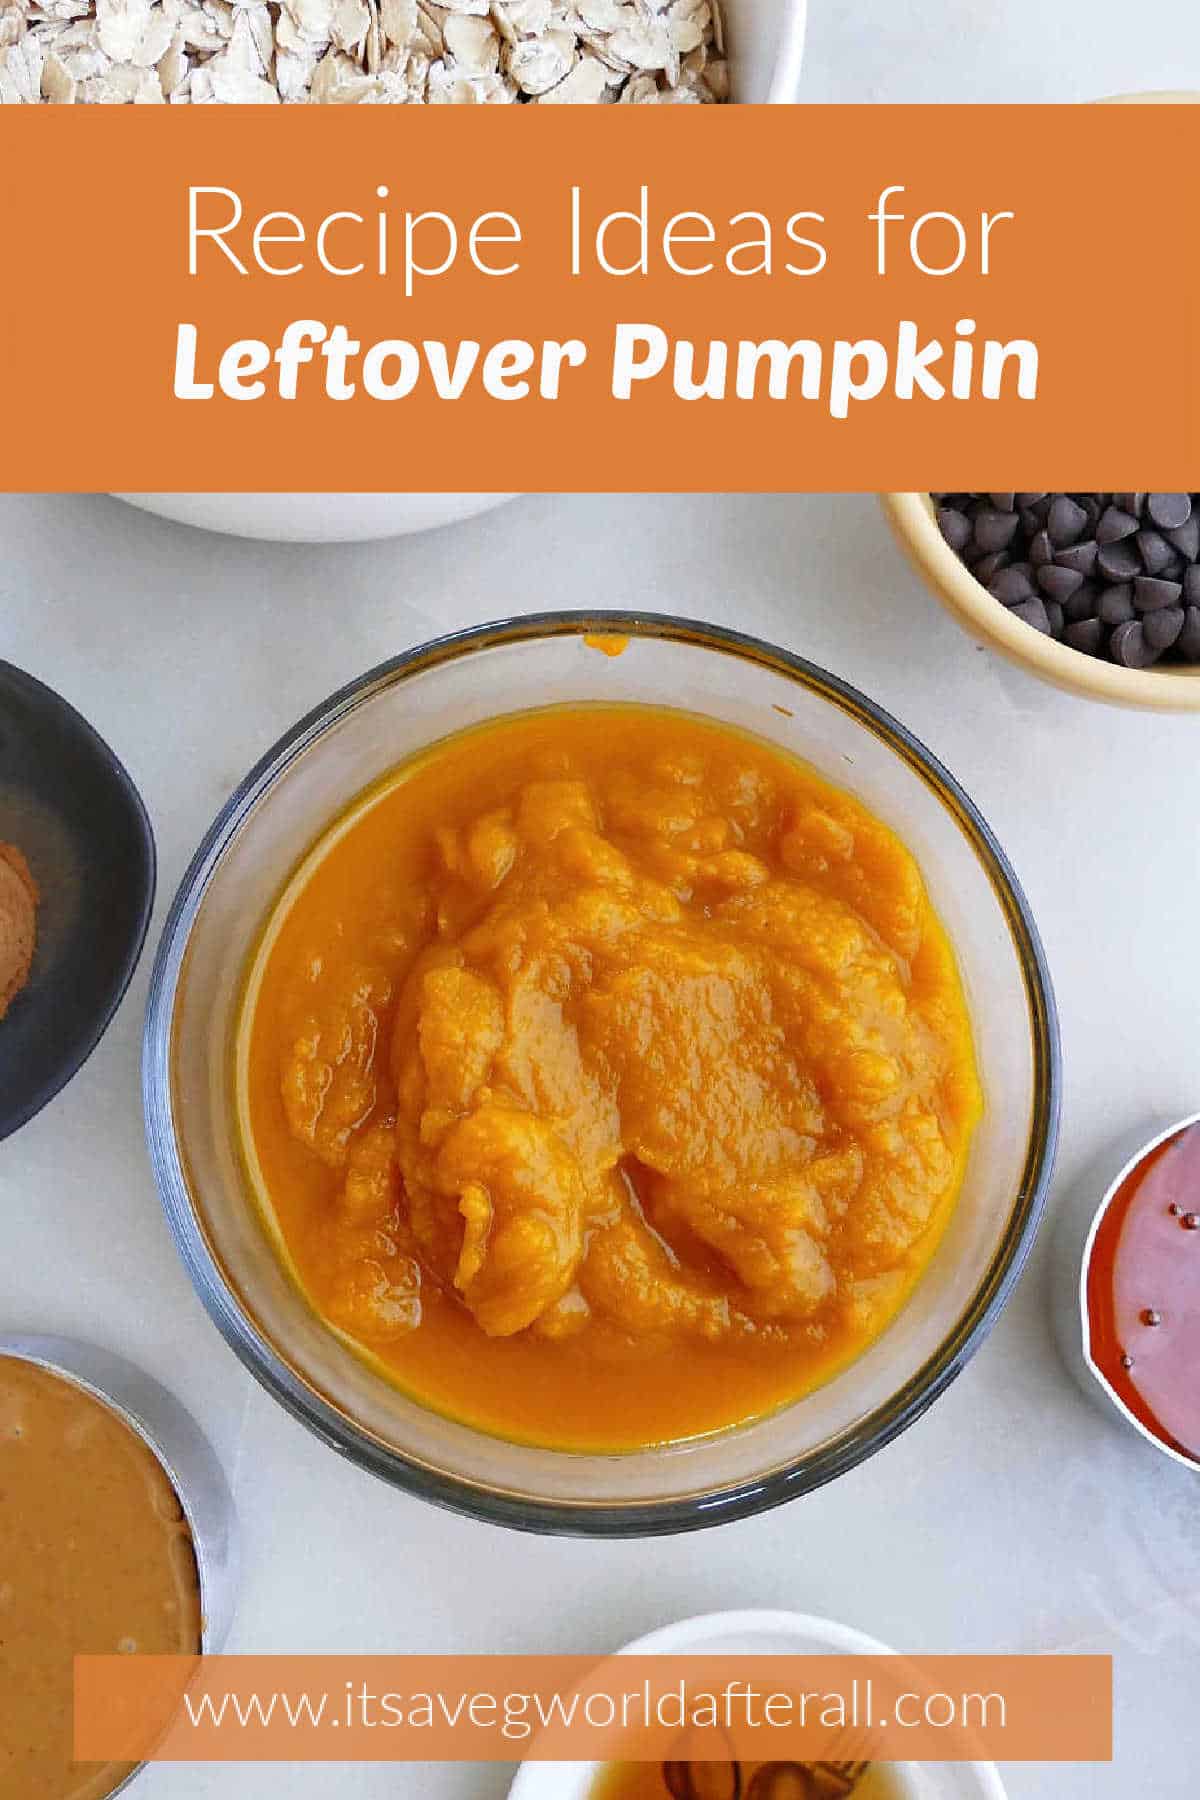 image of pumpkin puree in a glass bowl with text boxes with post name and website